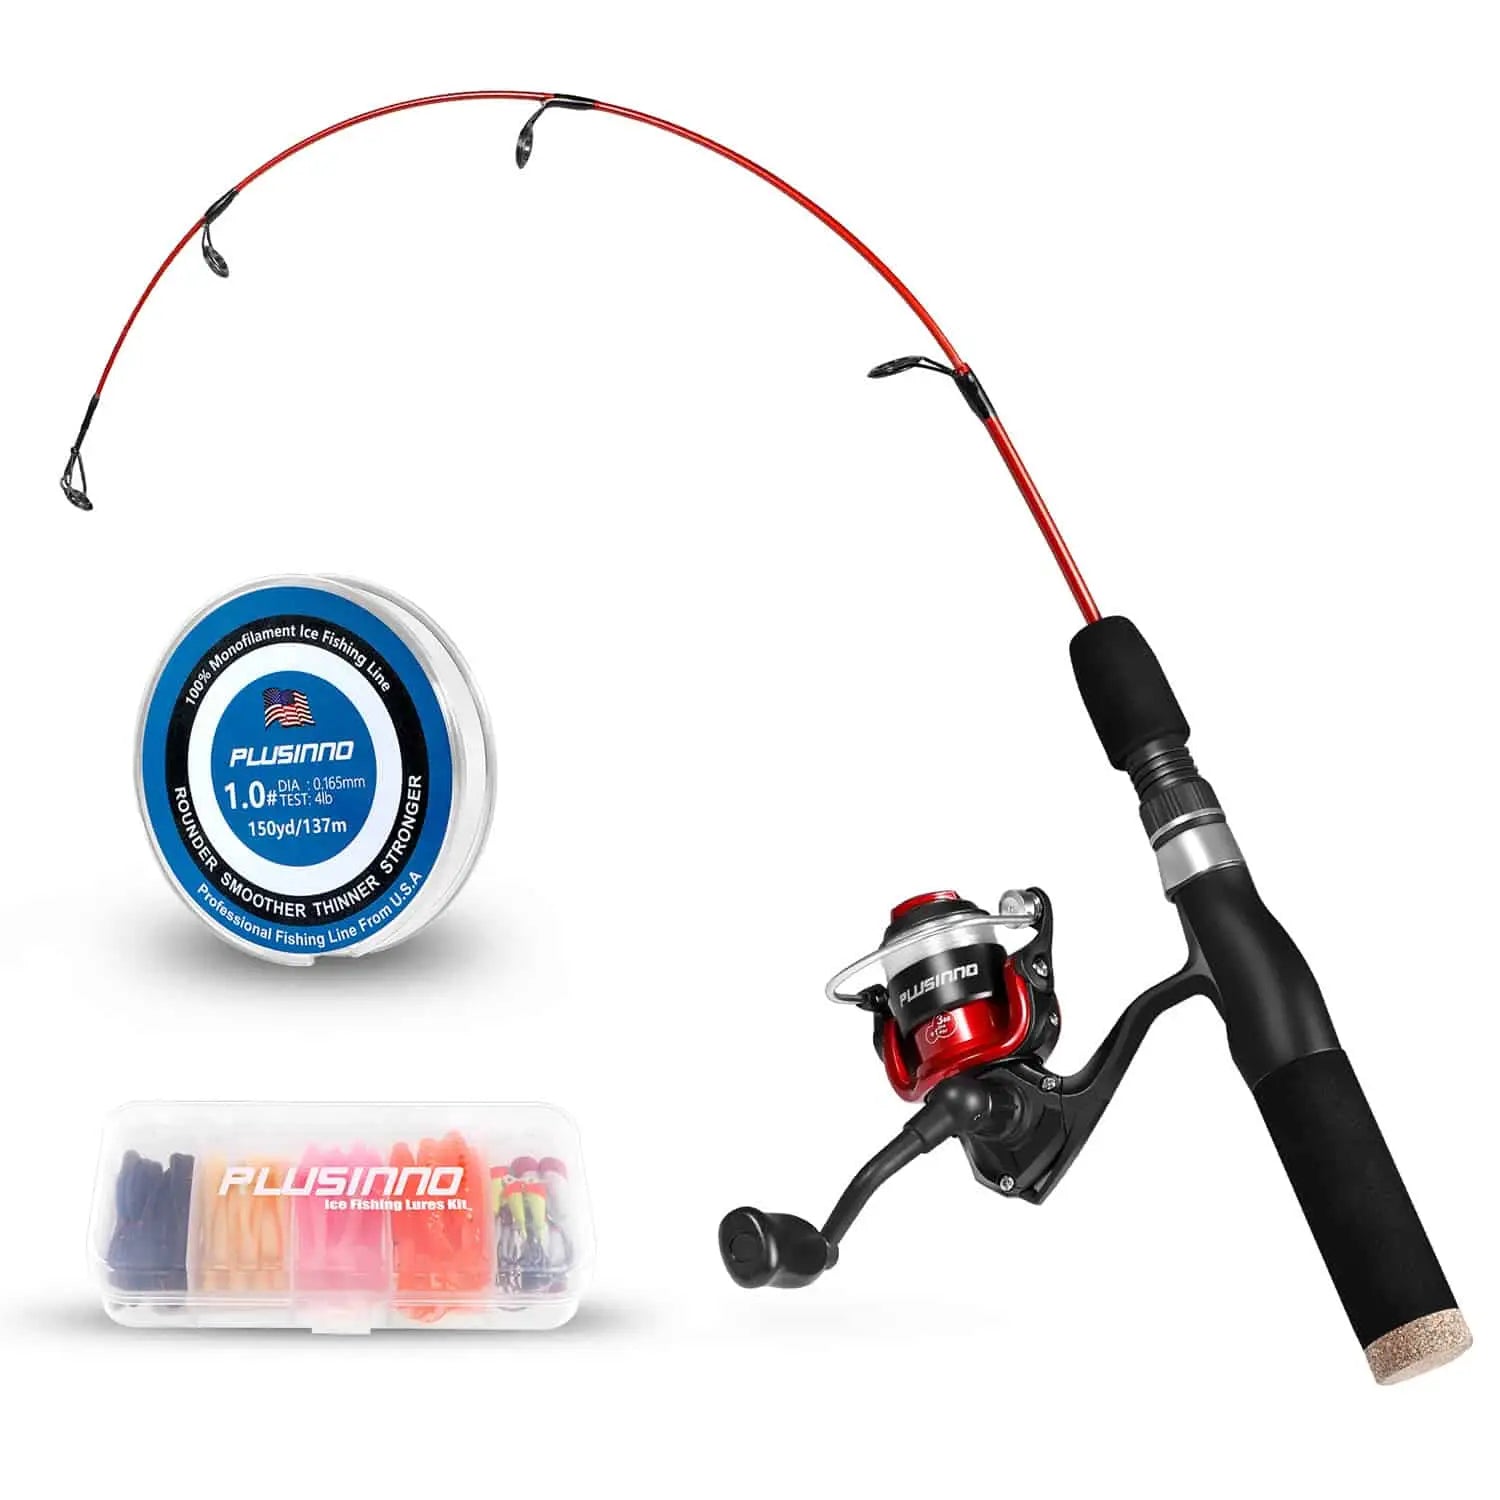 Ultra Light Fishing Rod: Make Your Fishing Adventures Much More Fun